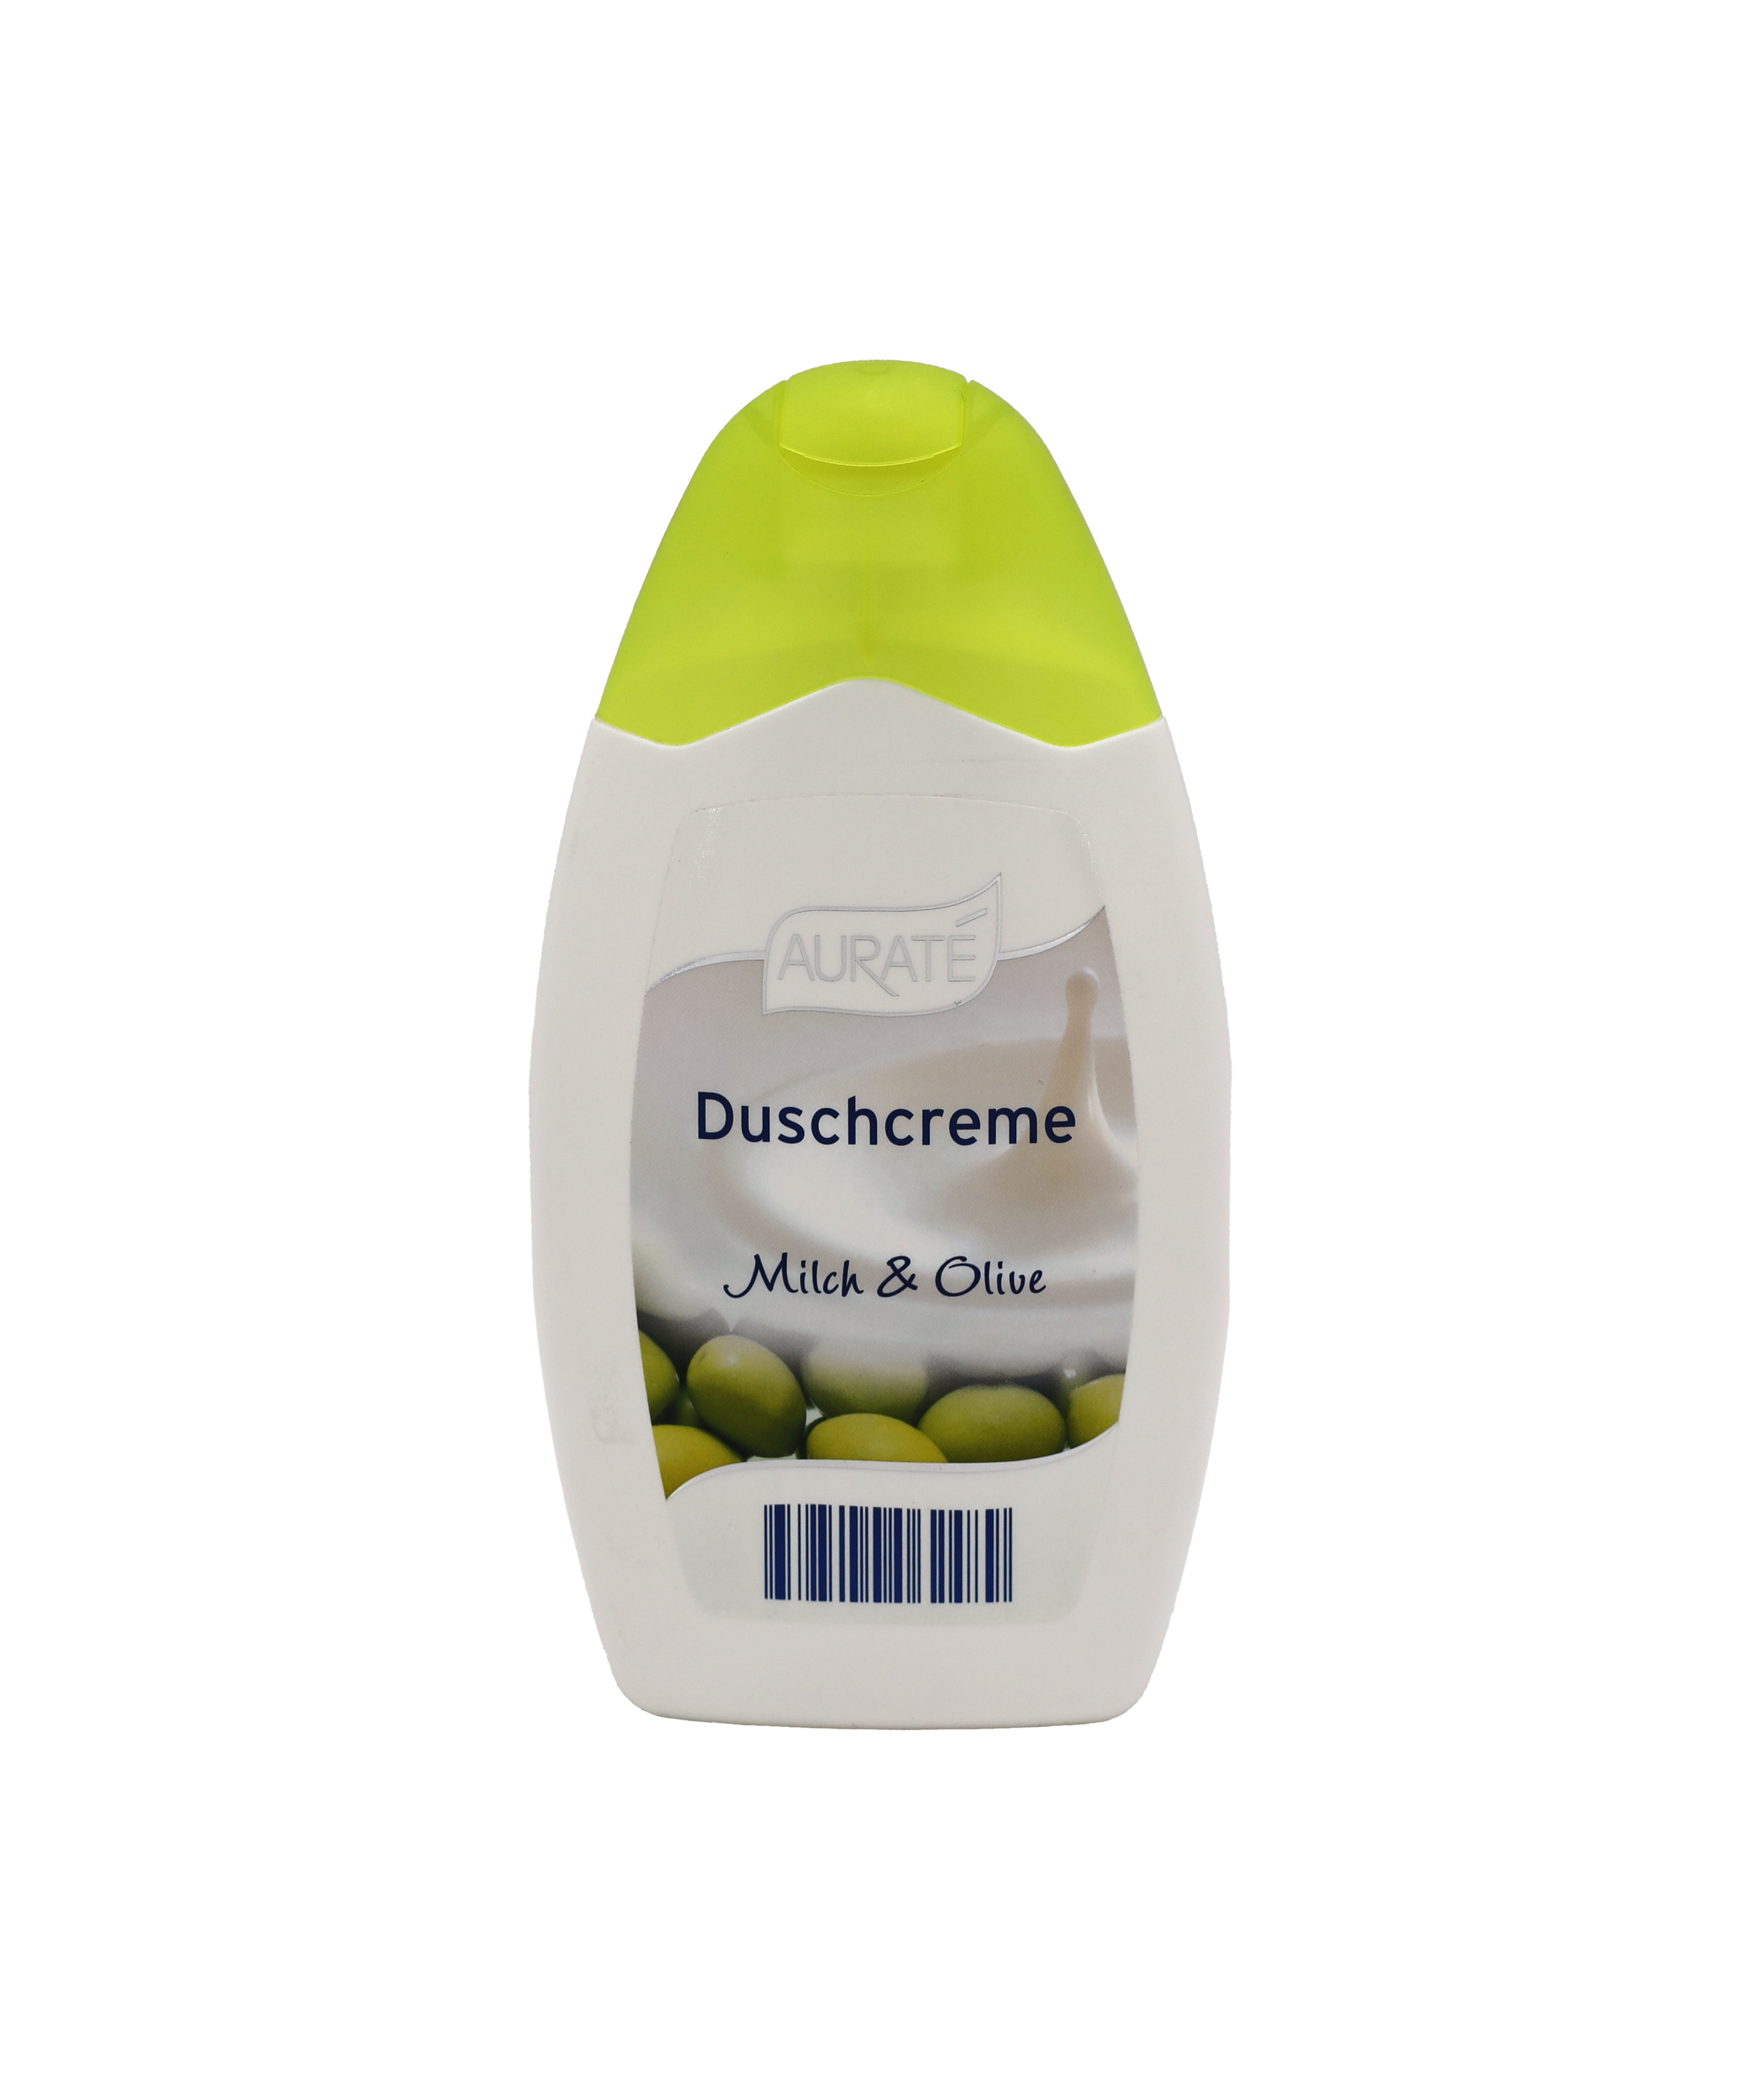 Aurate Duschcreme Milch & Oliven 300ml